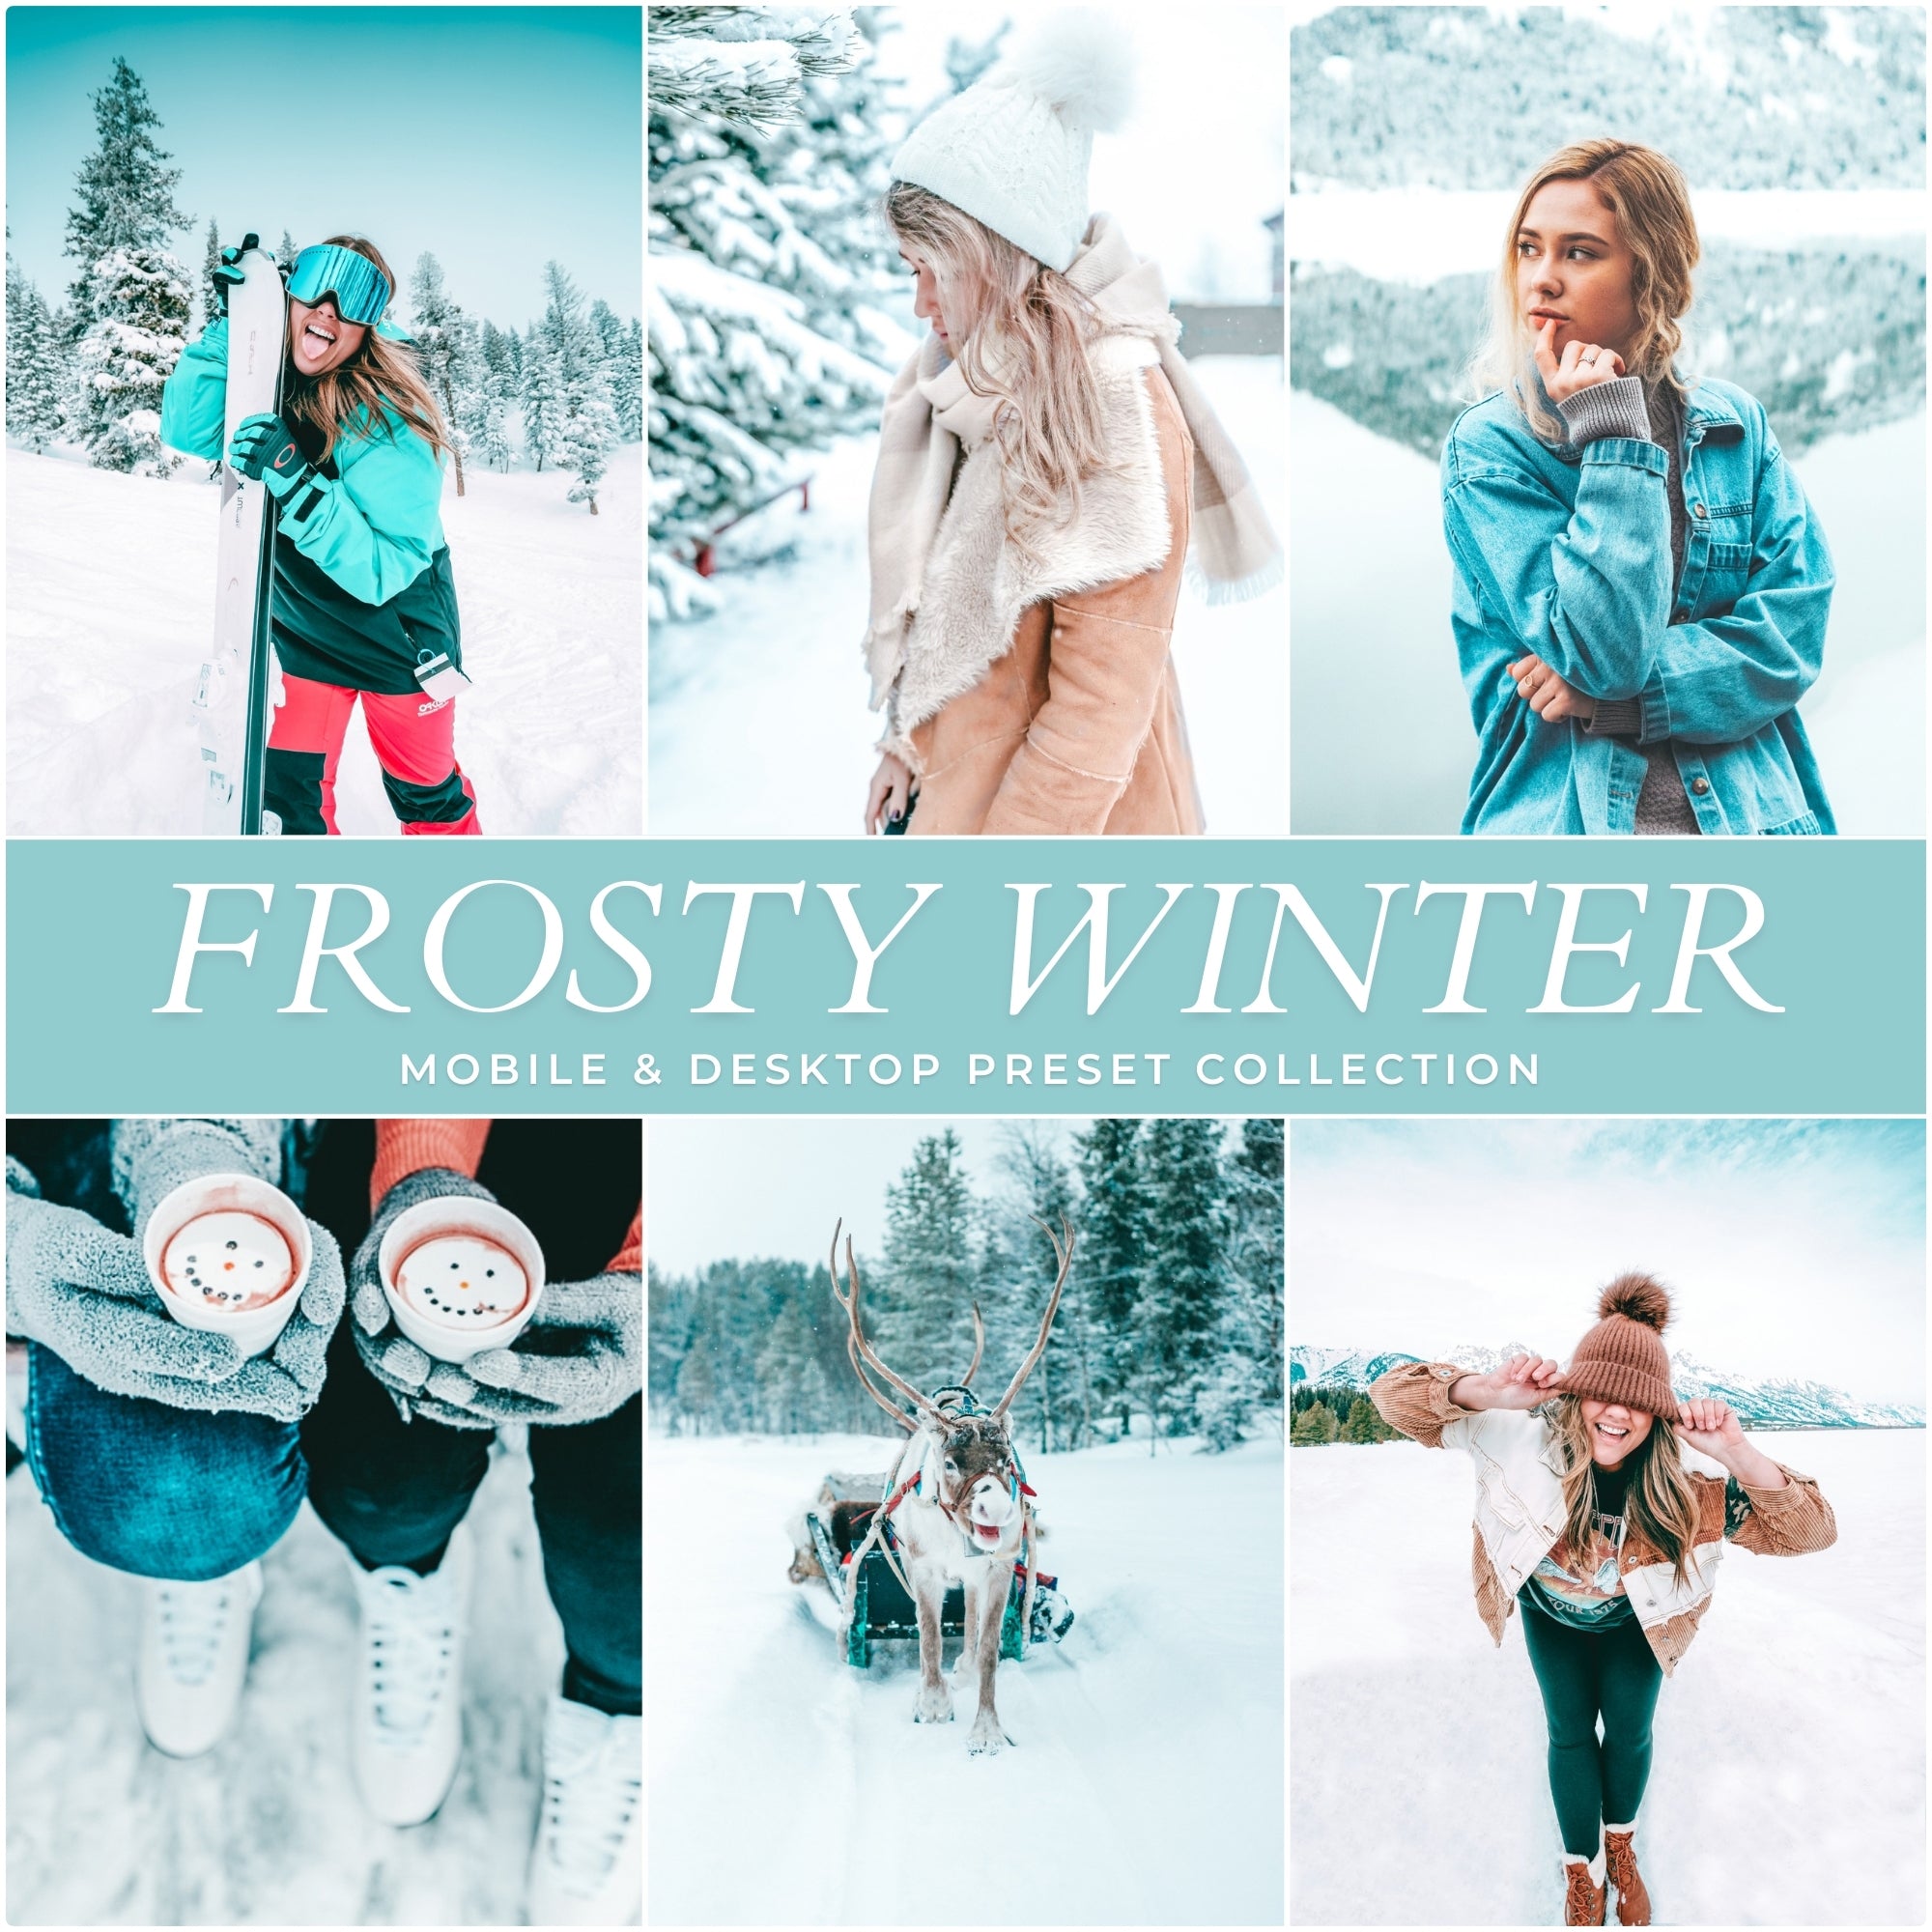 Frosty Winter Lightroom Presets For Photographers and Instagram Influencers Photo Editing In Adobe Lightroom By Lou And Marks Presets